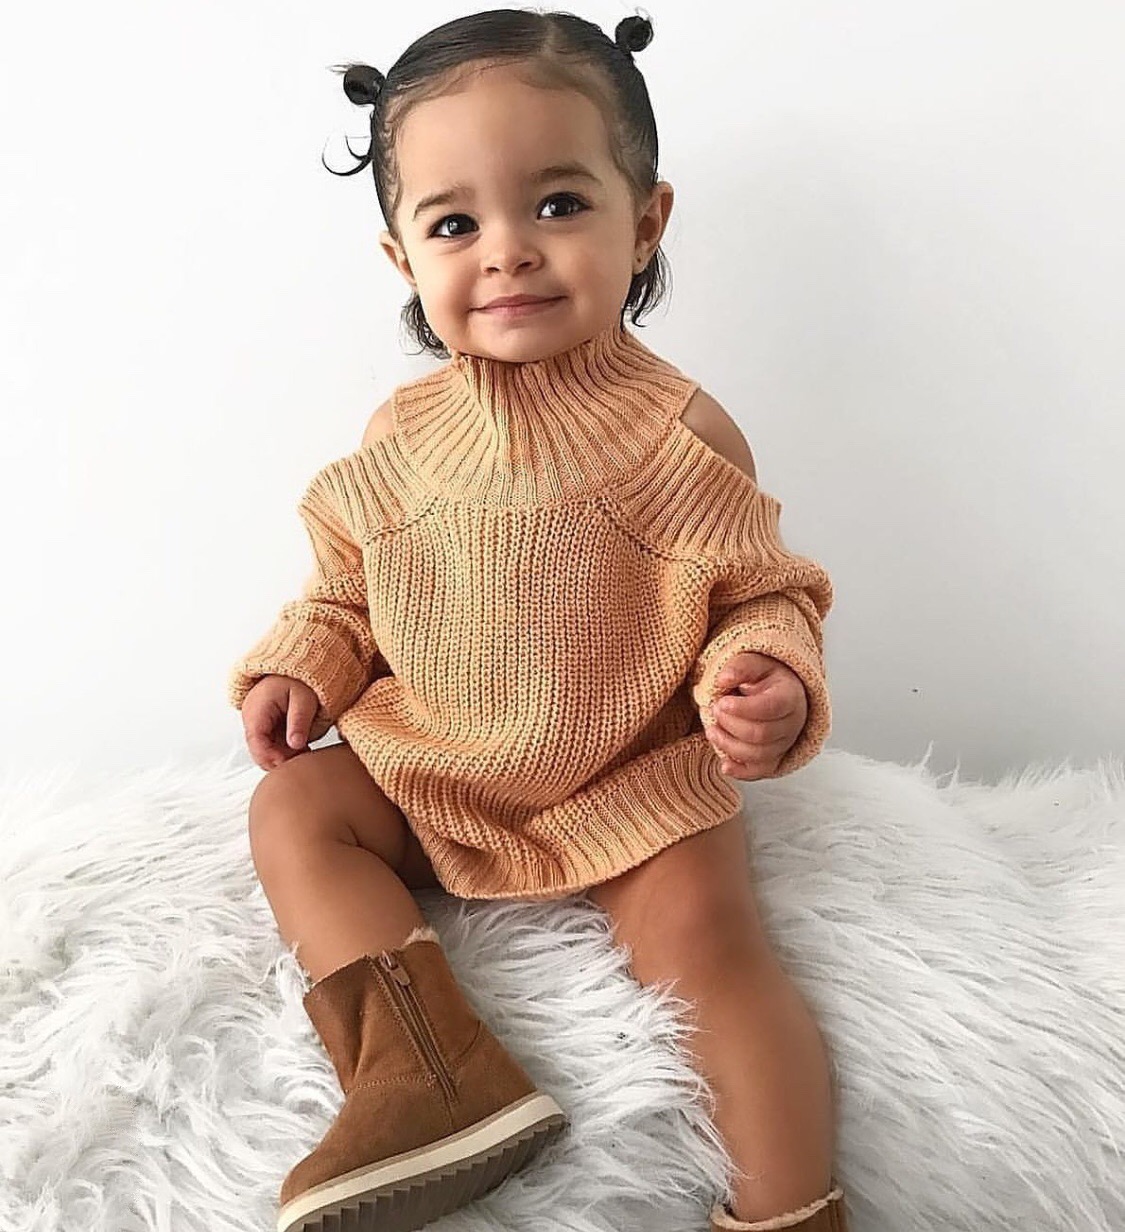 Handmade brown kids couture knit sweater - Slaylebrity